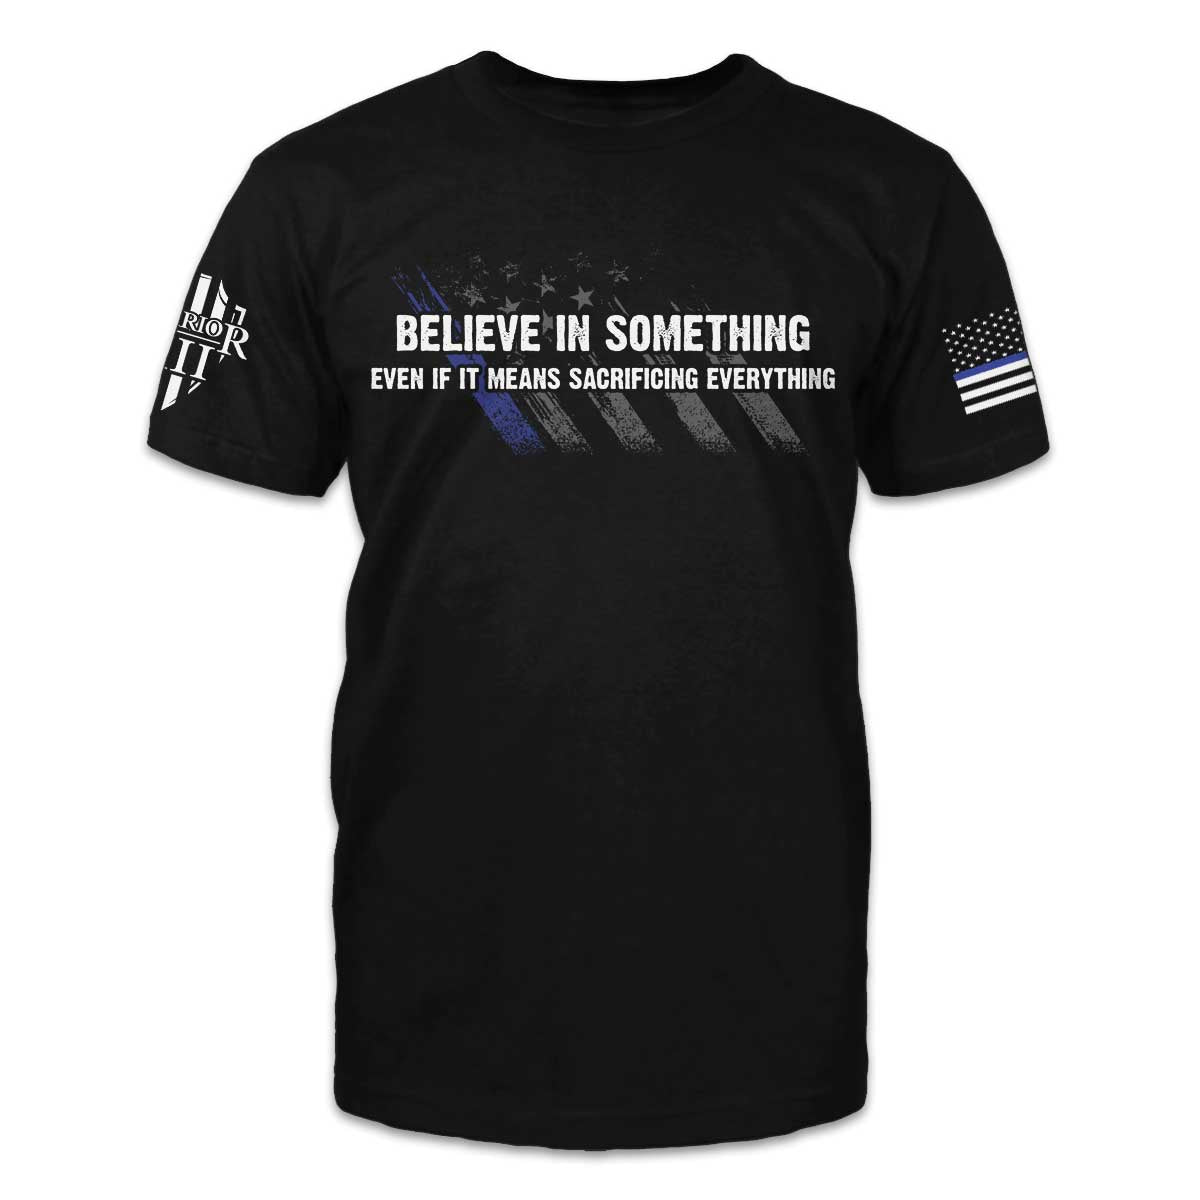 A black t-shirt with the words 'Believe In Something, Even If It Means Sacrificing Everything" printed on the front.